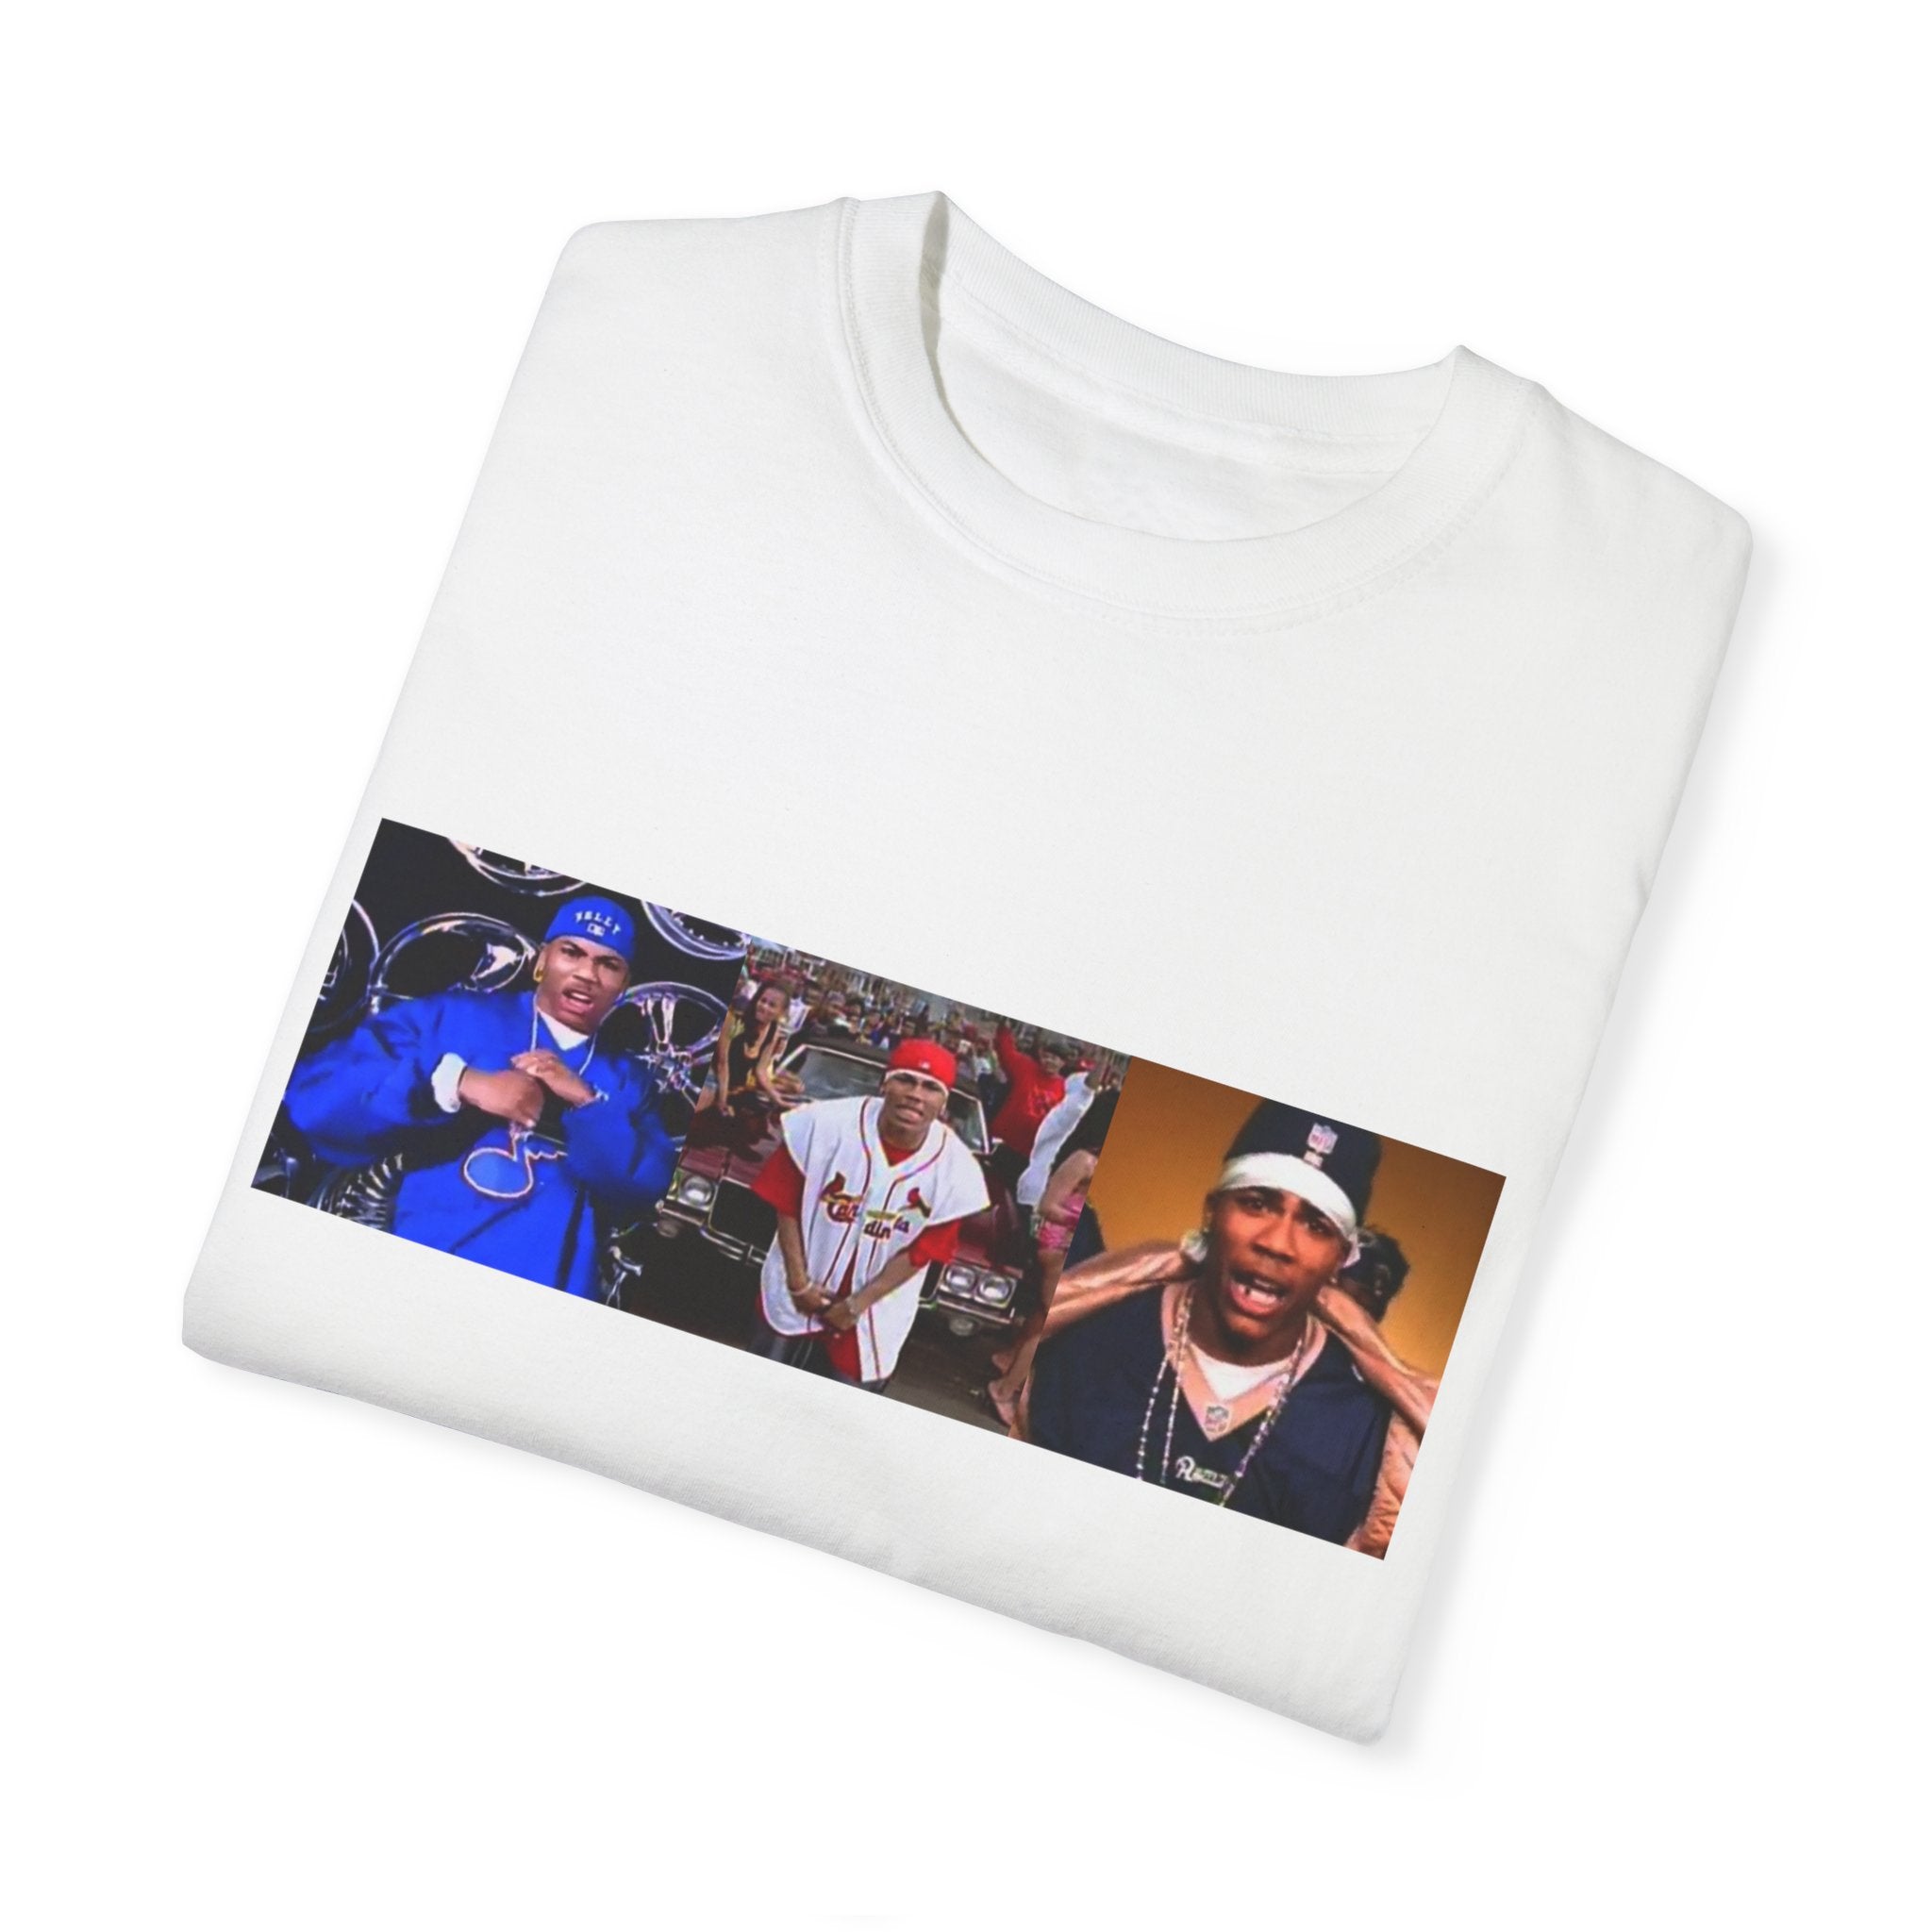 Nelly Tee